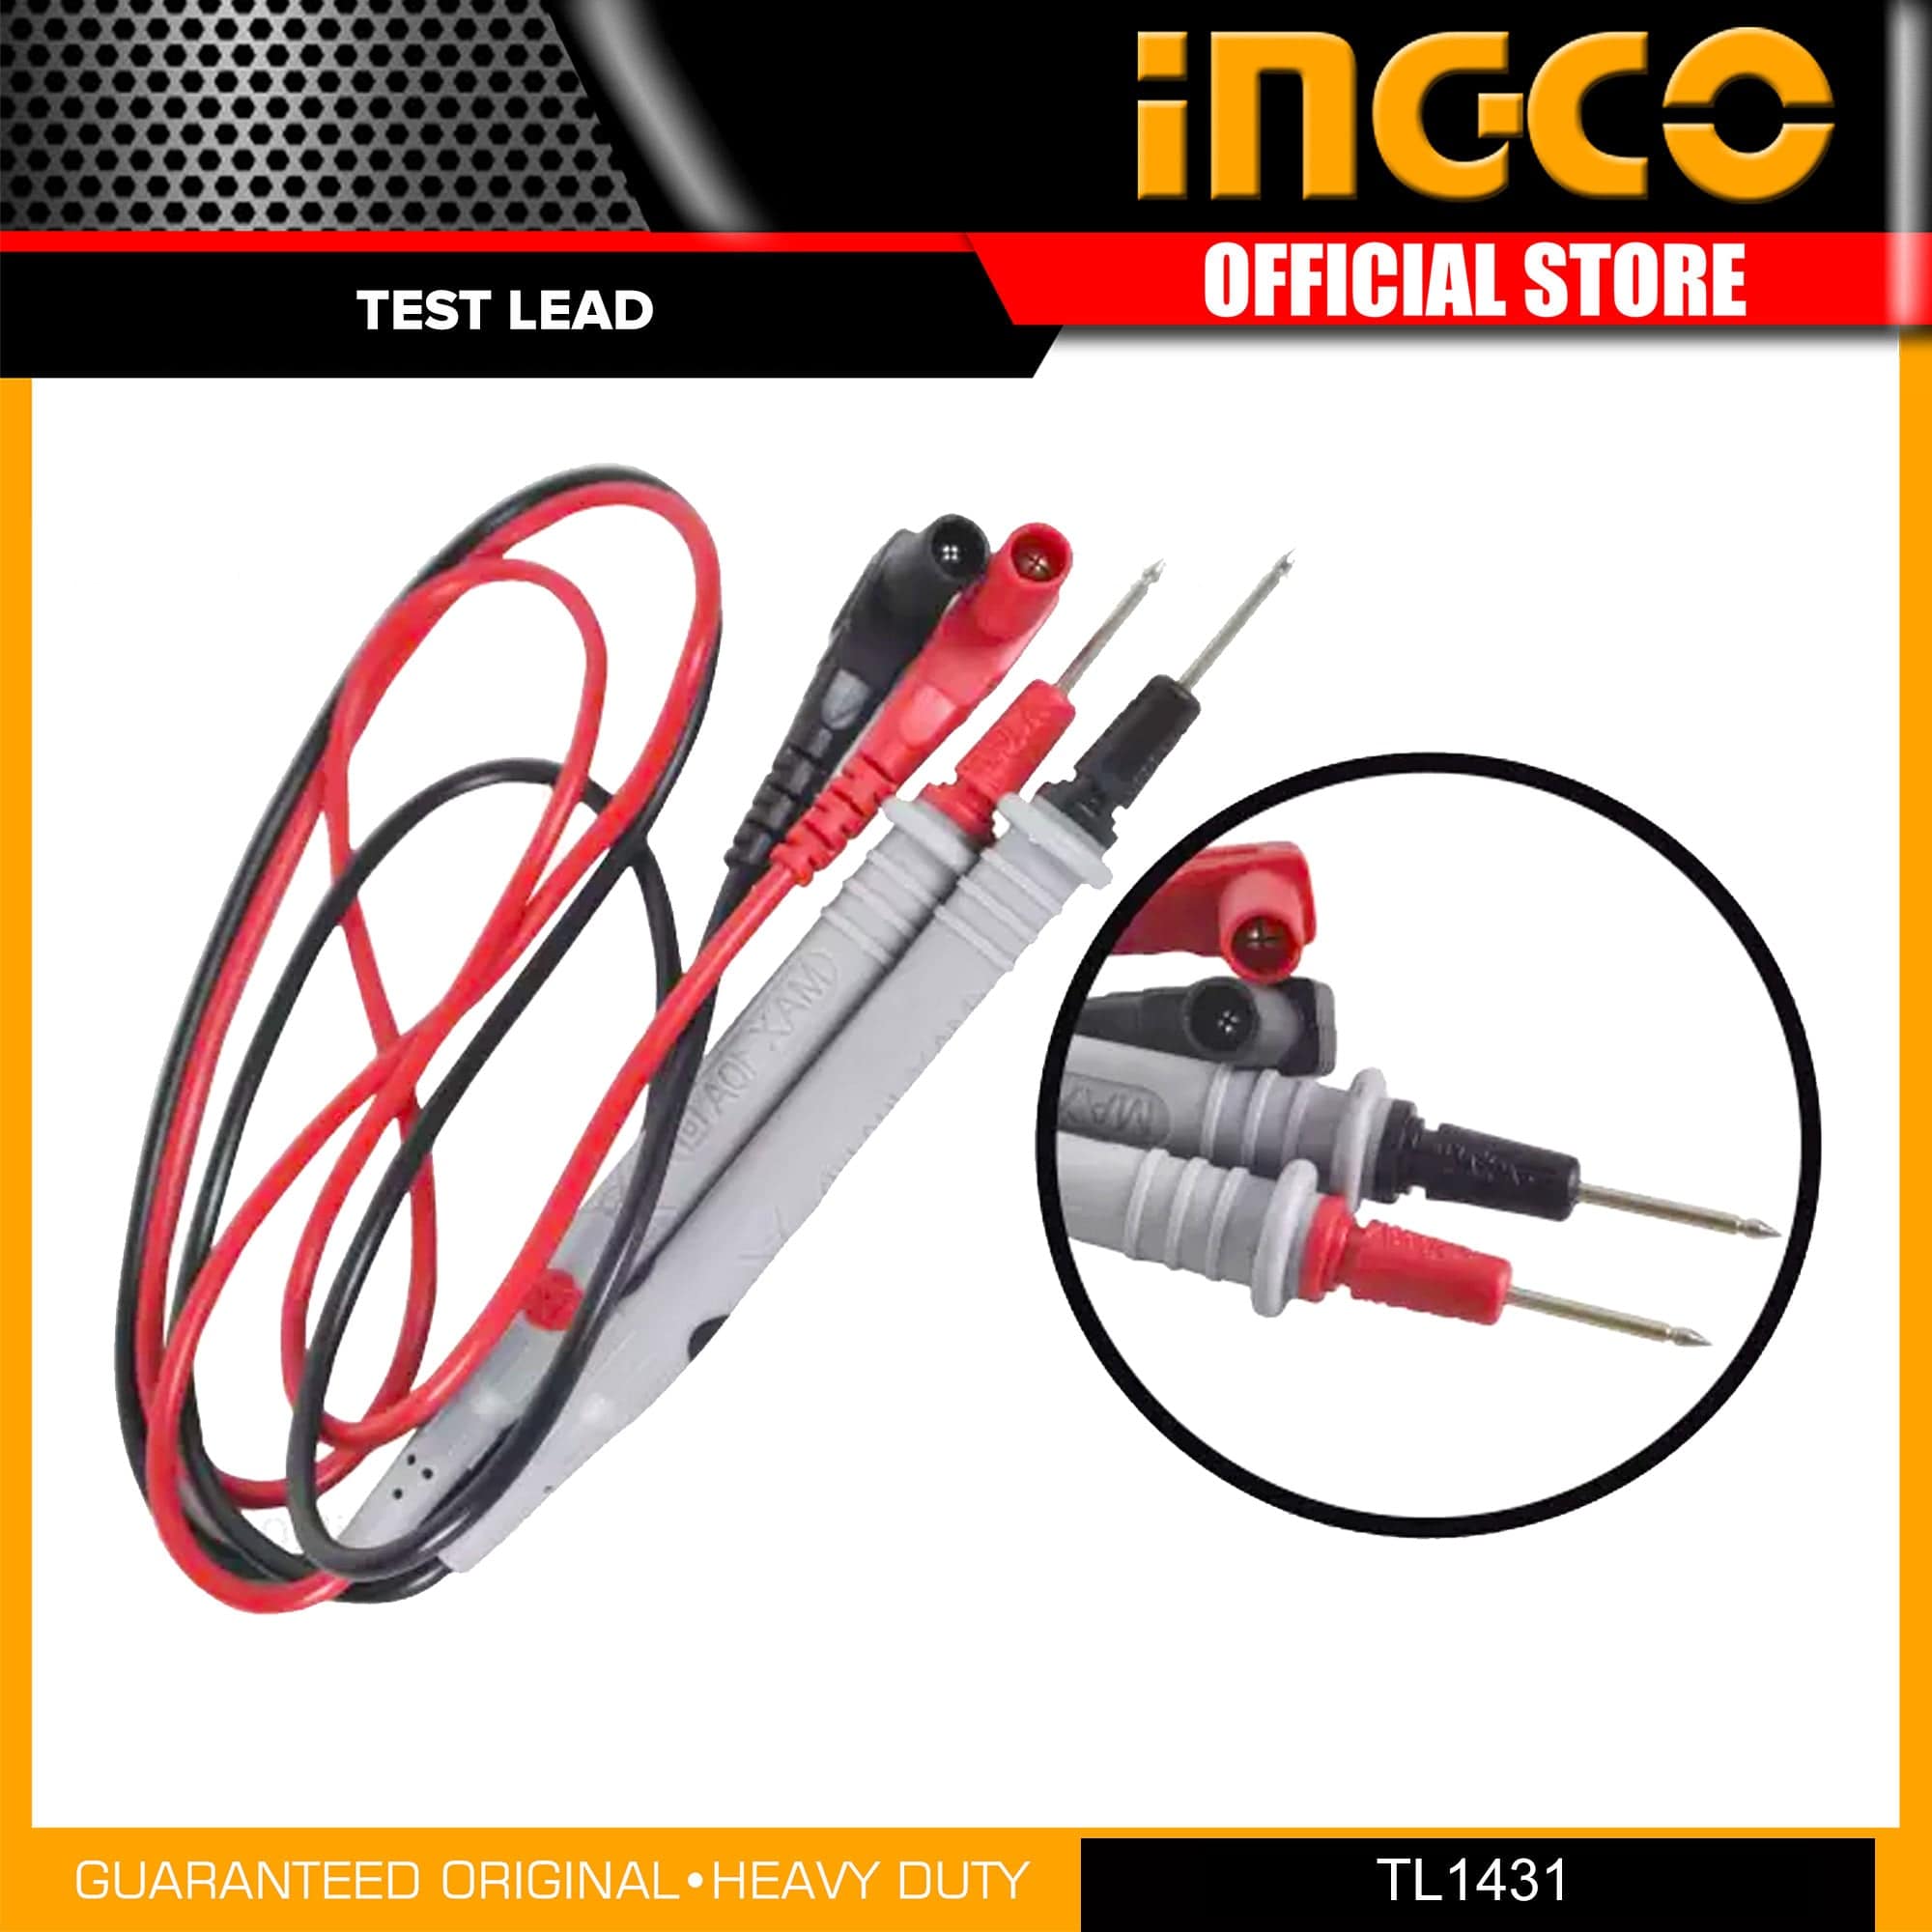 Ingco Insulated Test Leads - TL1431 | Buy Online in Accra, Ghana - Supply Master Digital Meter Buy Tools hardware Building materials